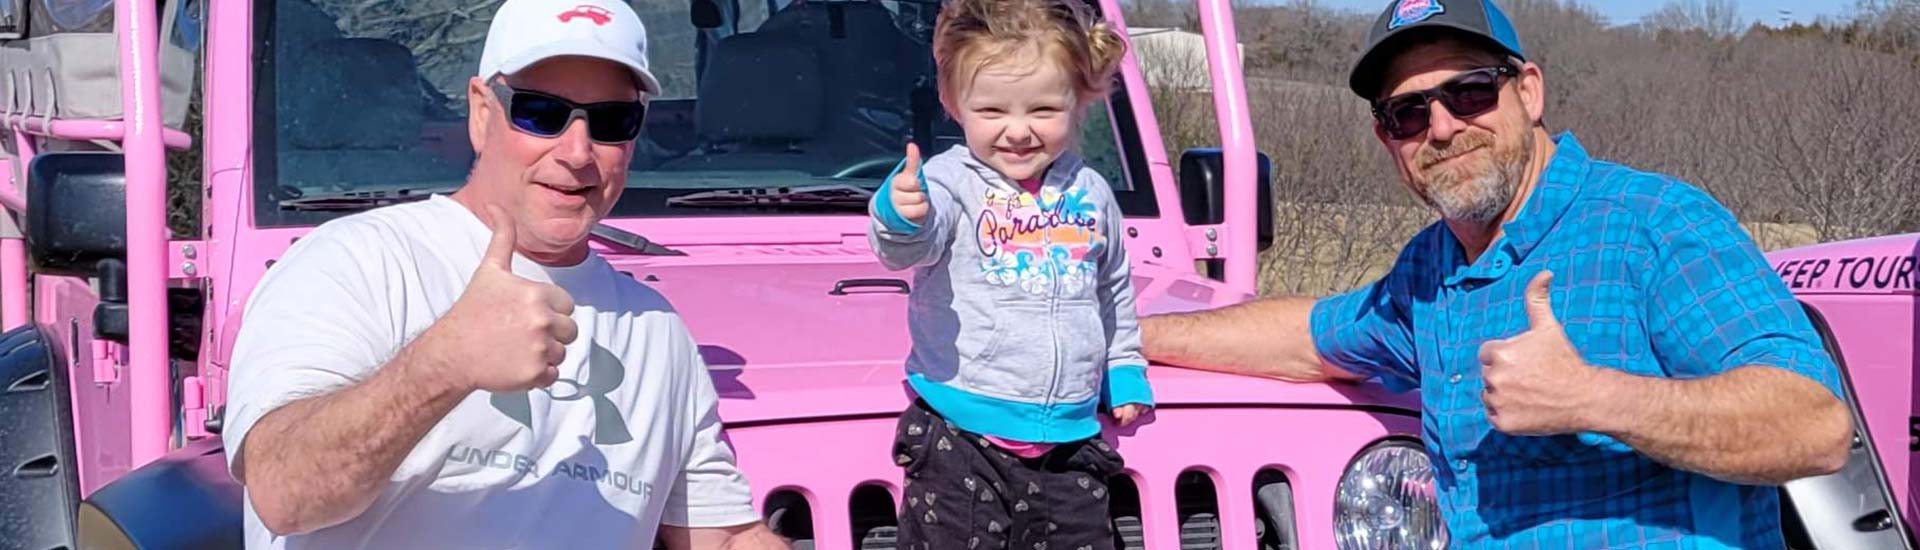 Header image of a toddler and two male adults giving a thumbs-up sign in front the grill on a Pink Jeep Wrangler.